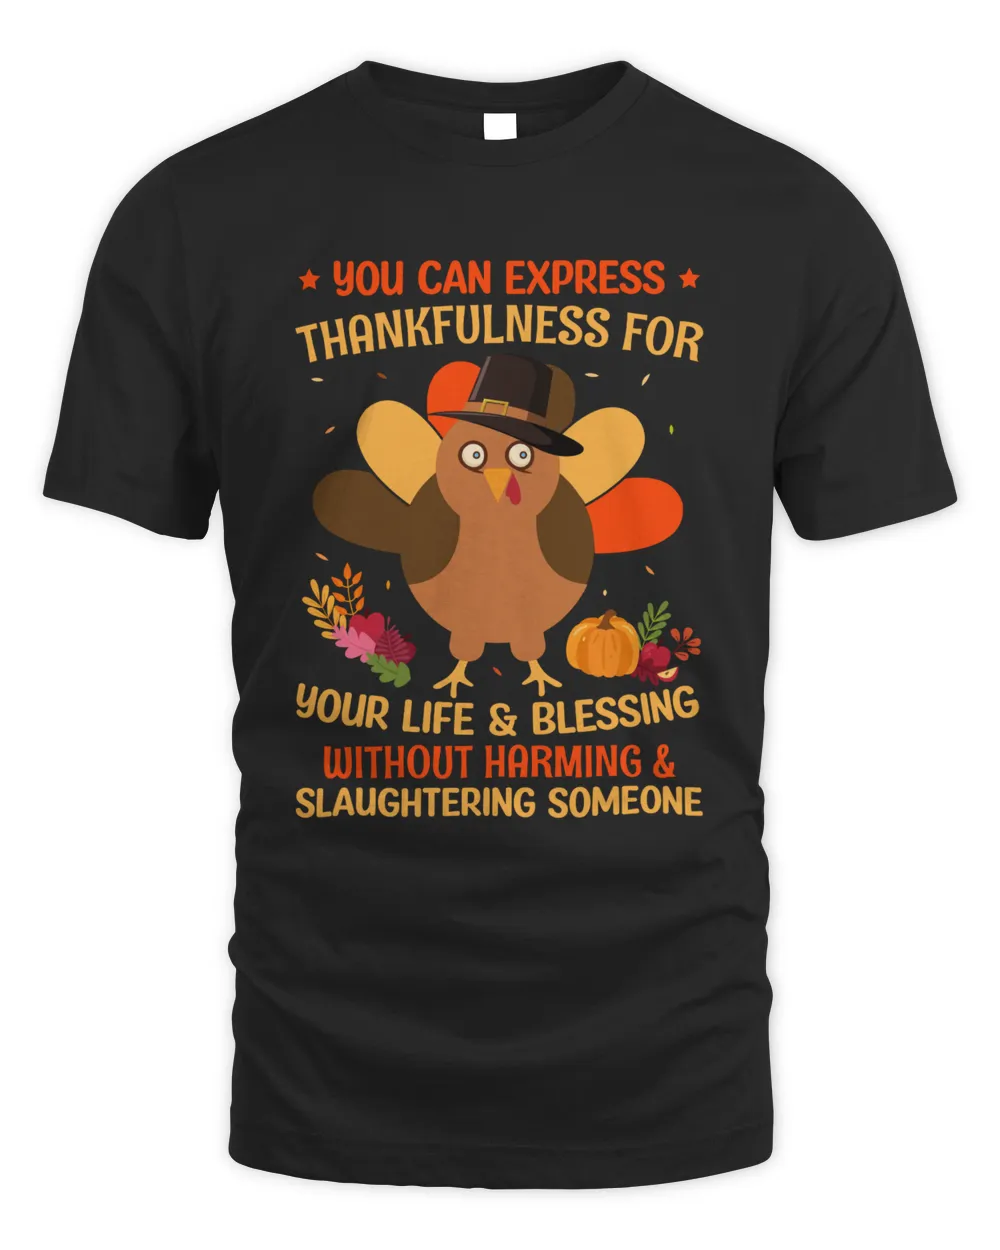 You can express thankfulness